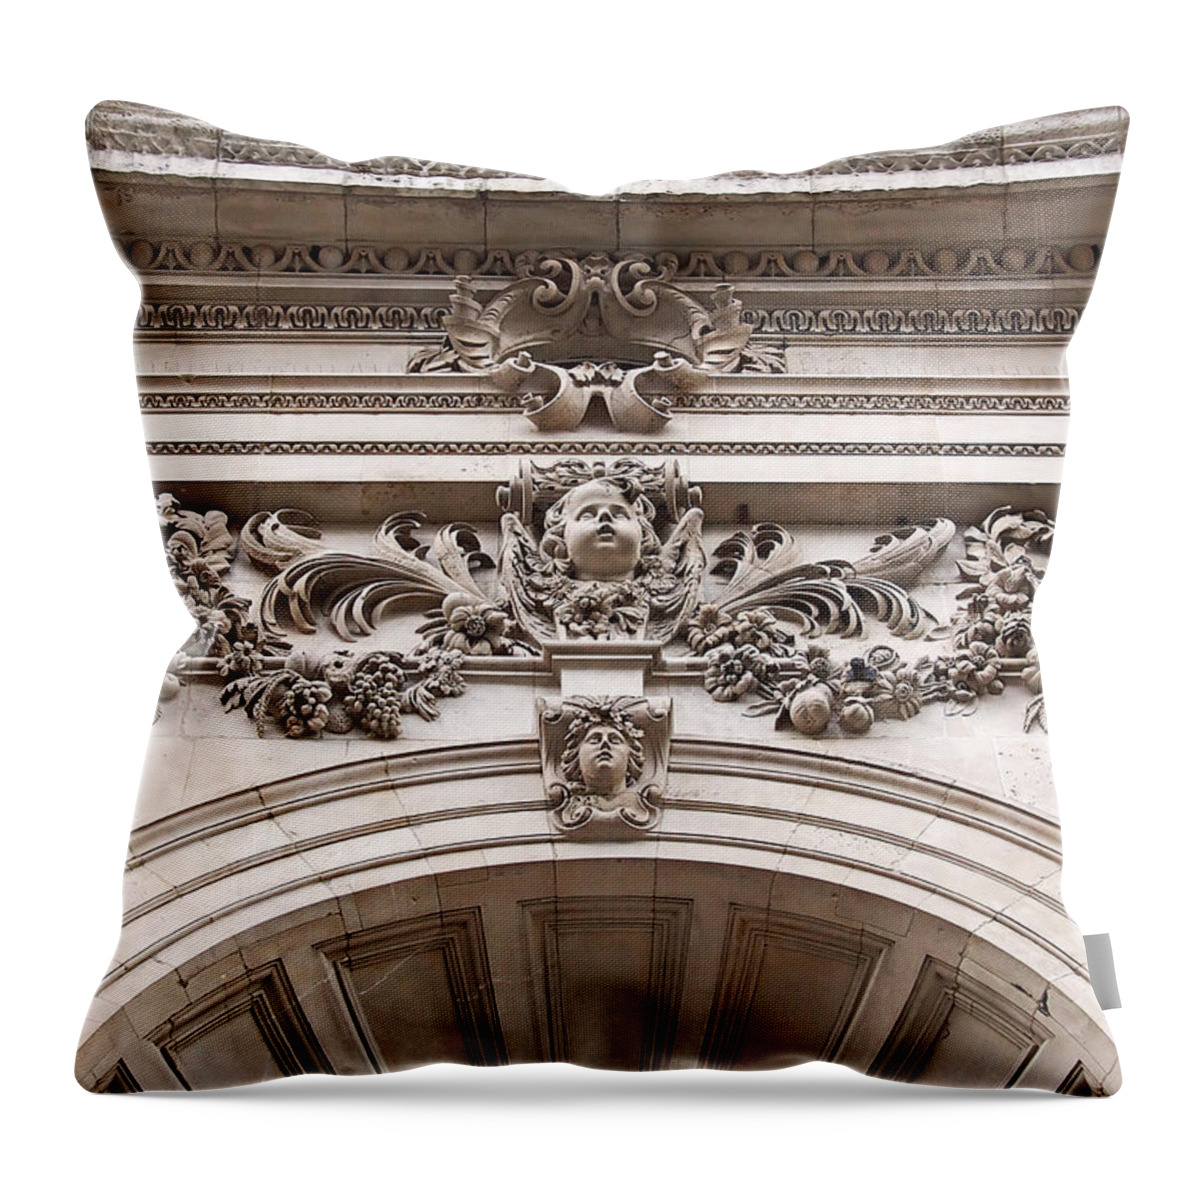 St Pauls Cathedral Throw Pillow featuring the photograph St Paul's Cathedral - Stone Carvings by Rona Black